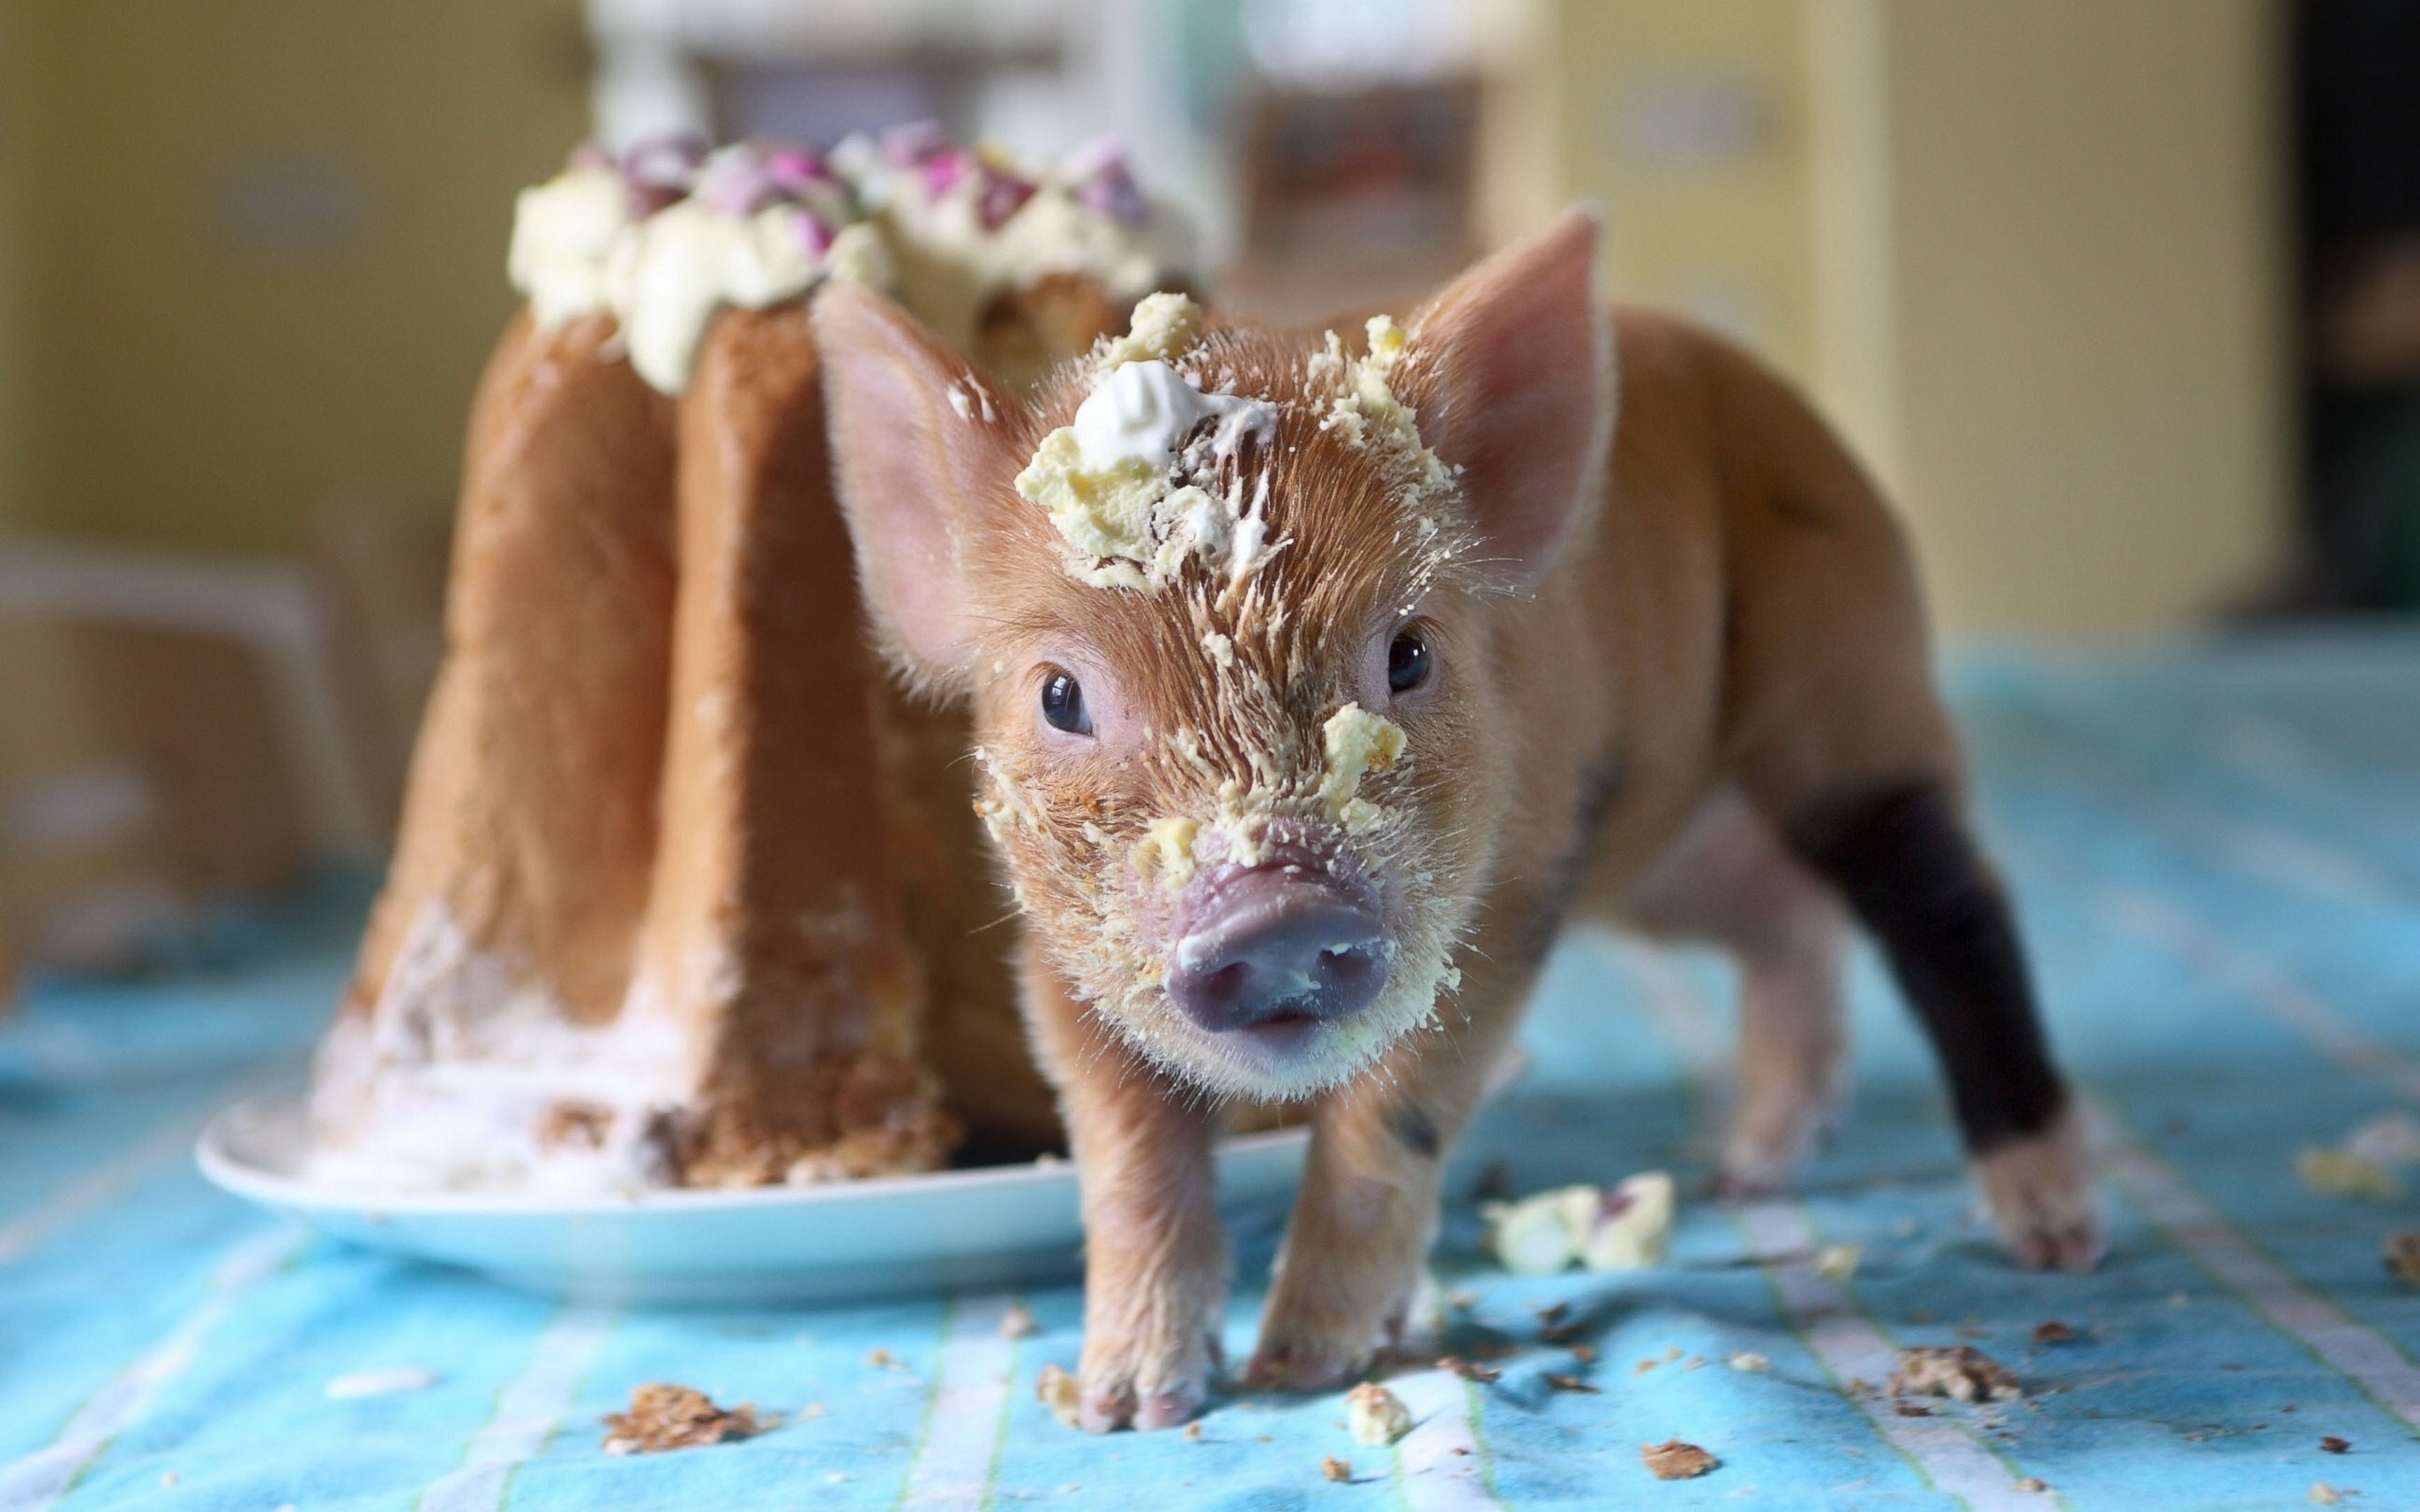 Pig Year about pigs HD wallpapers #6 - 2560x1600